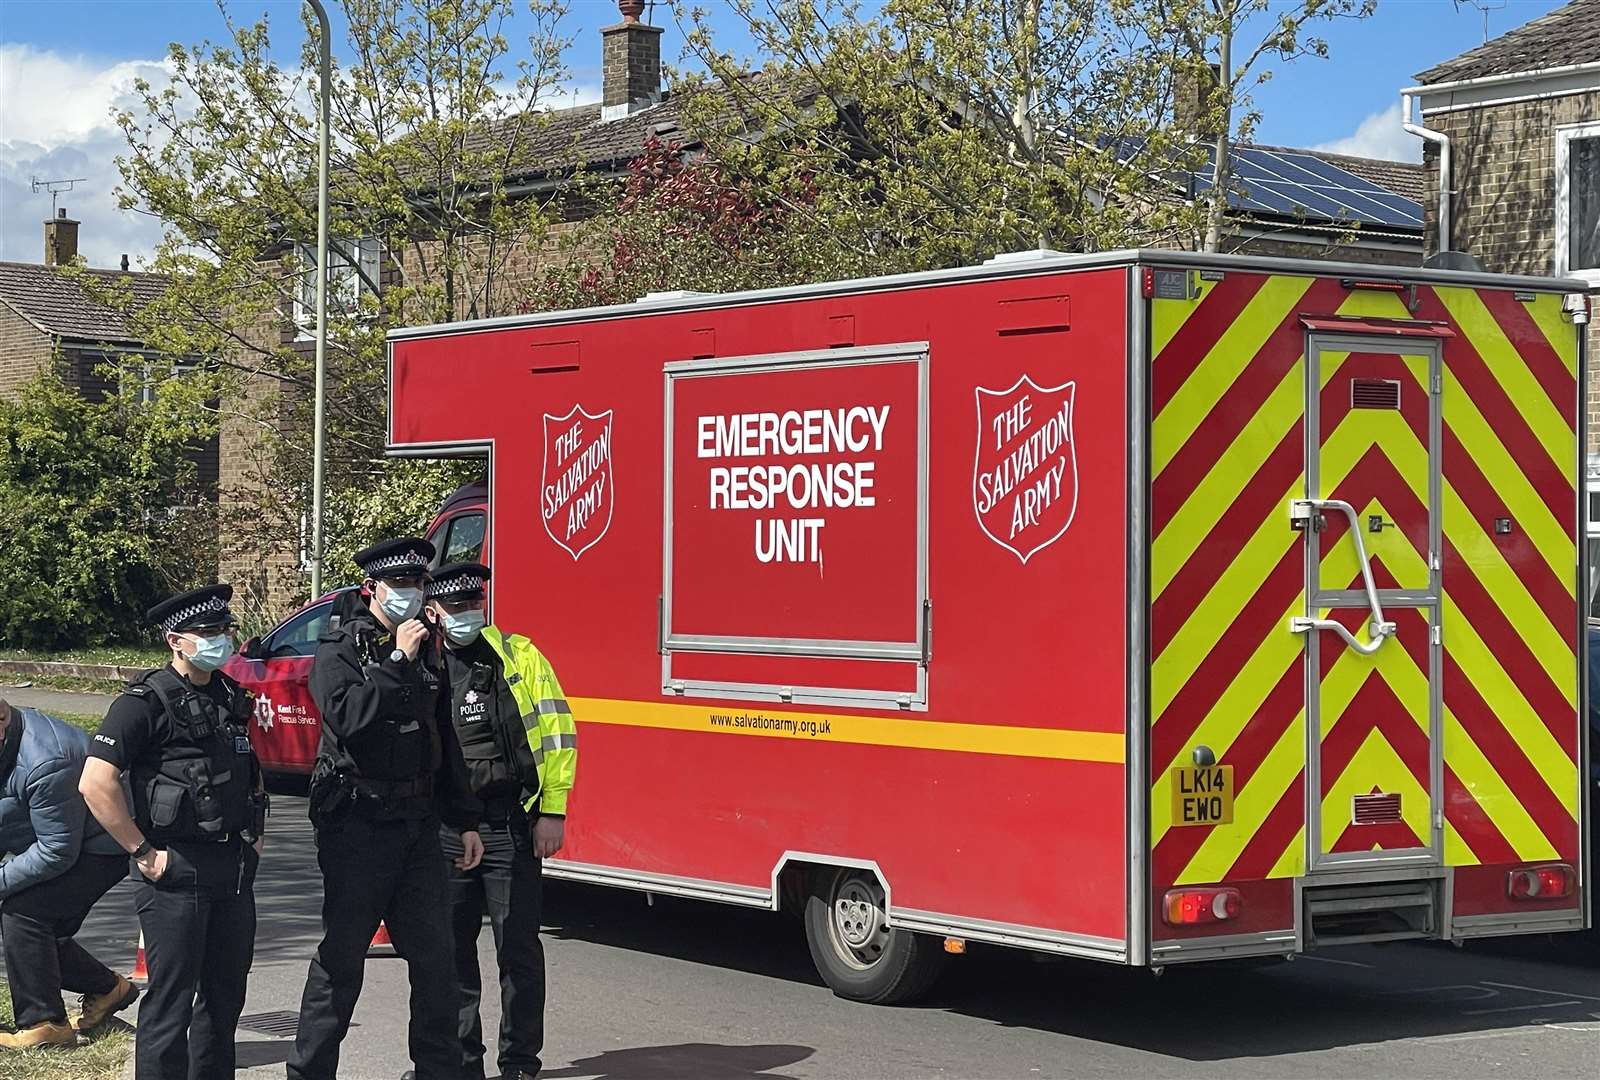 The Salvation Army has been on hand providing refreshments for residents and emergency services